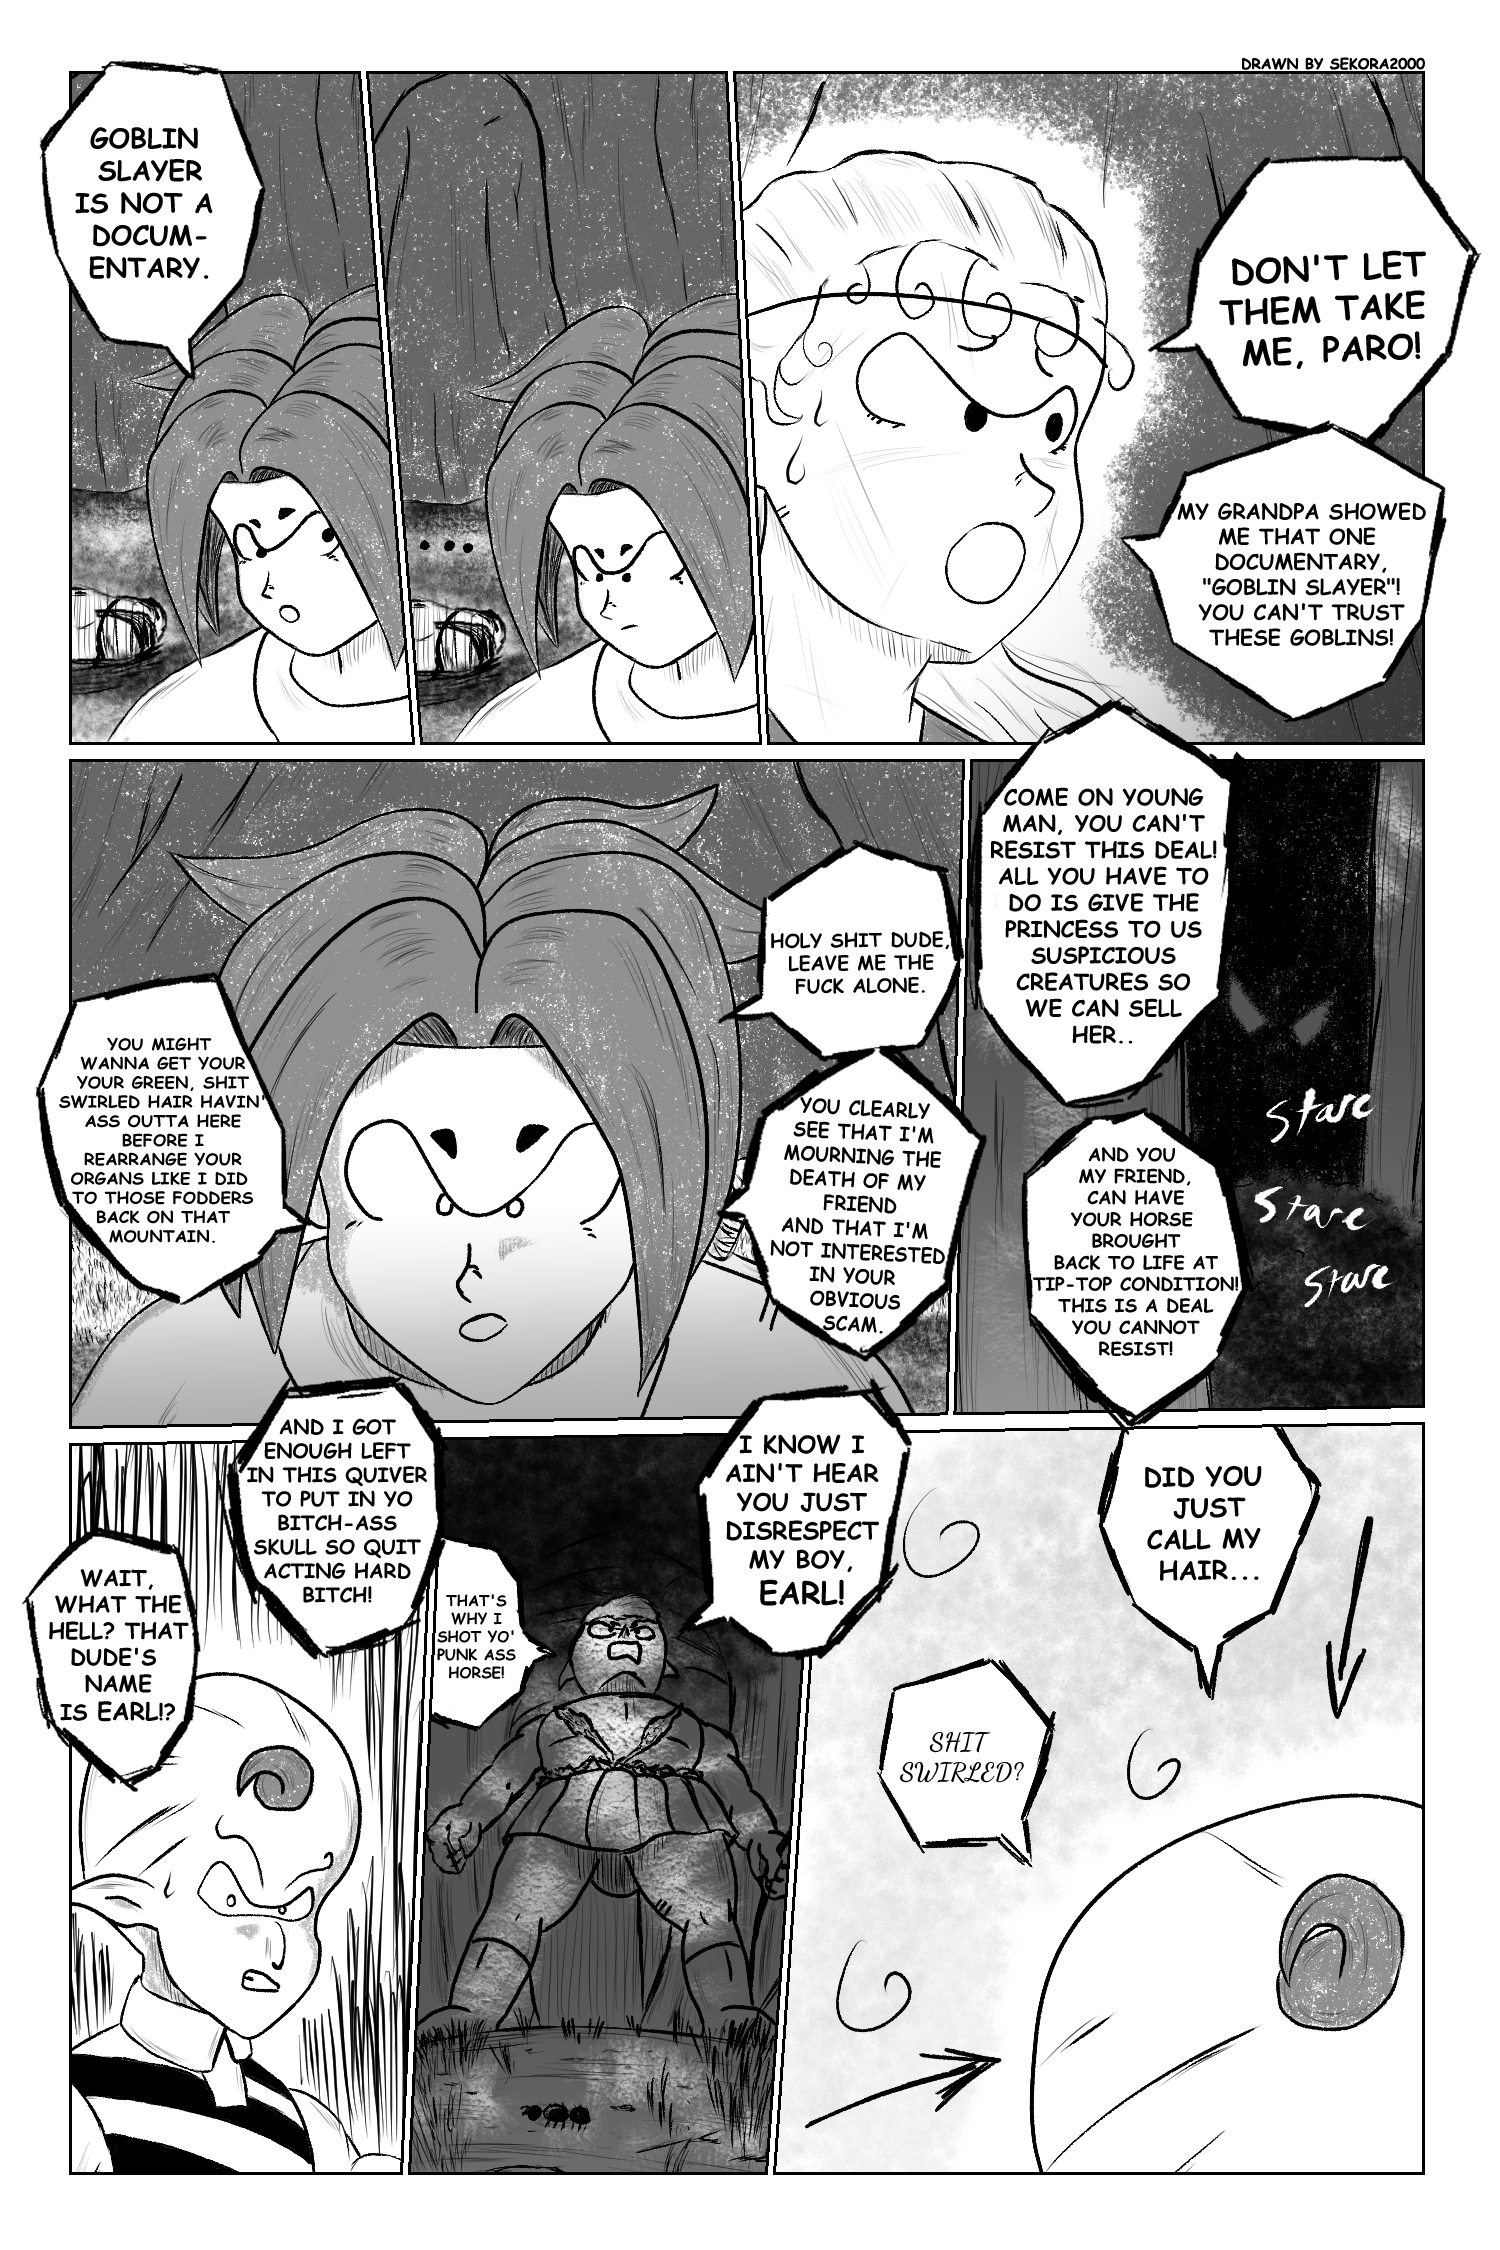 Misenchanted - Page 3